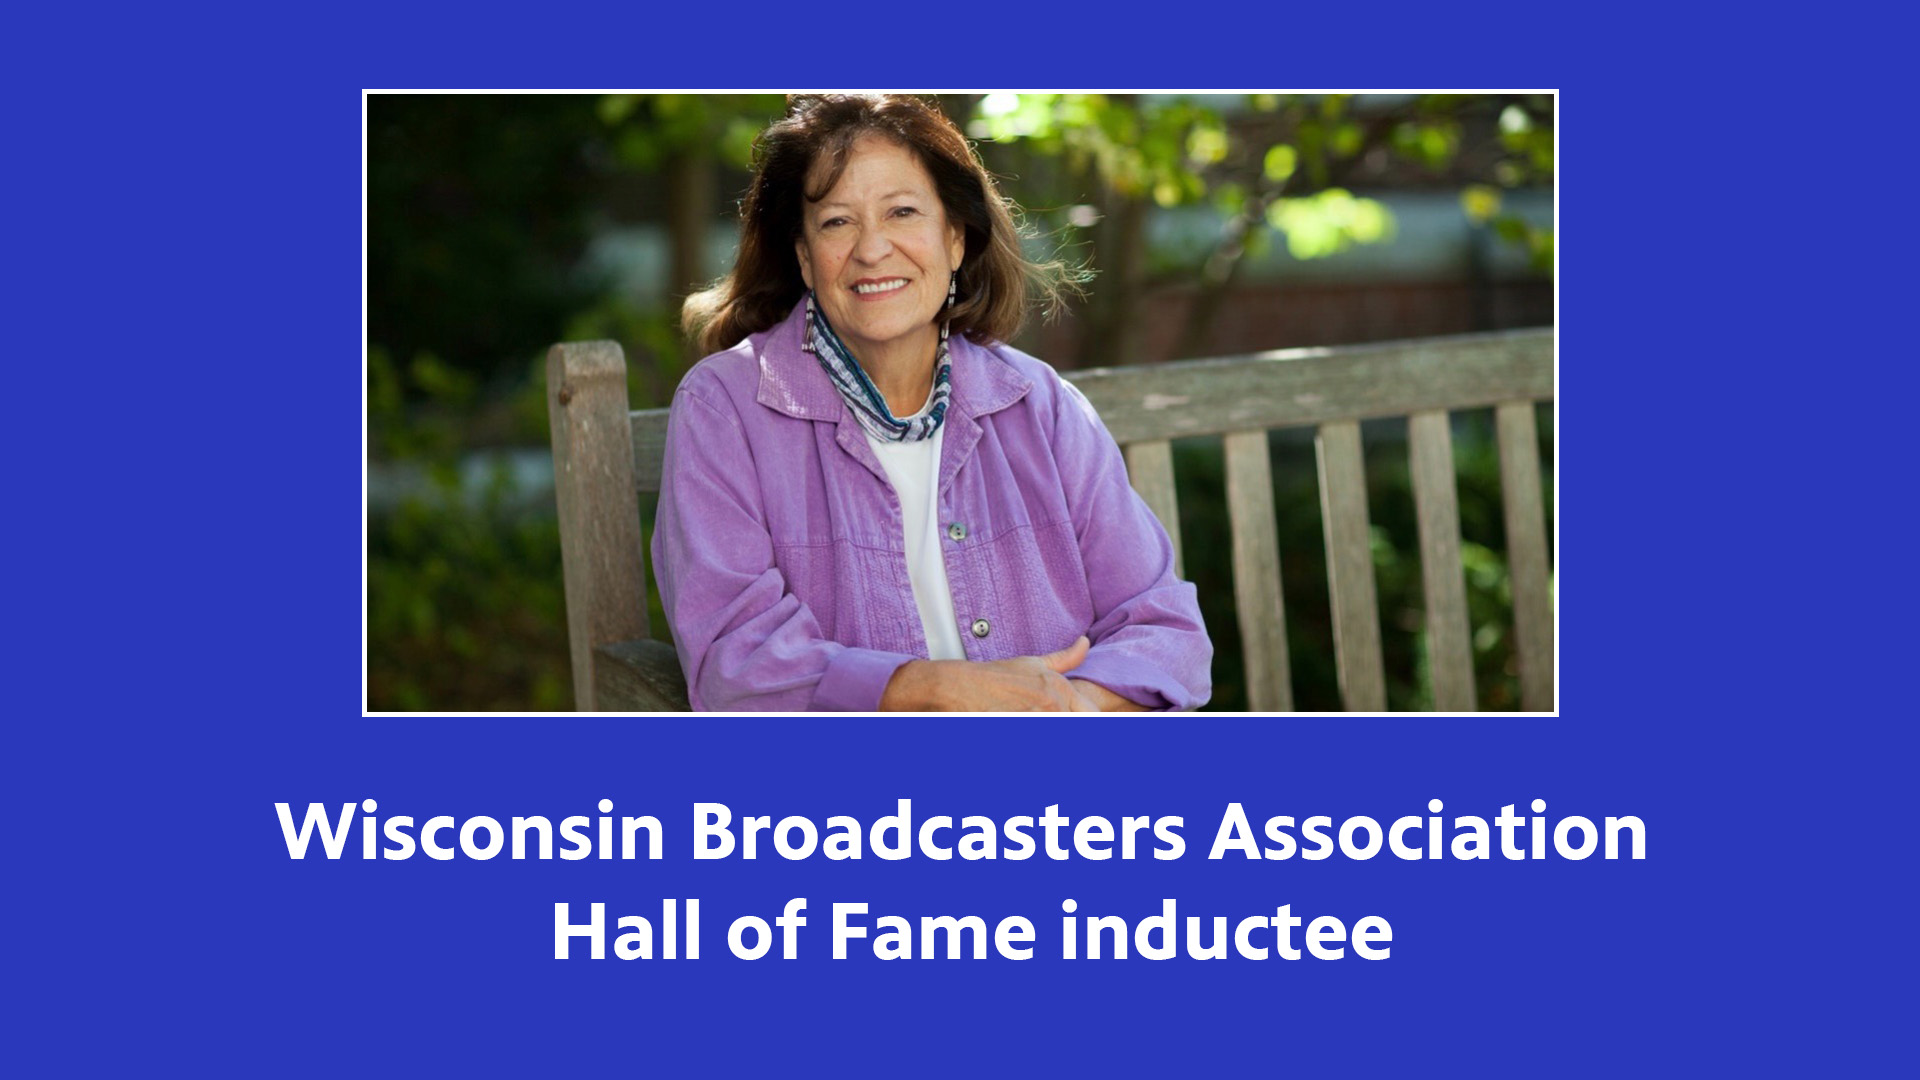 Wisconsin Broadcasters Association Hall of Fame inductee Patty Loew, a former PBS Wisconsin host and producer, sitting on a park bench with a blue background.